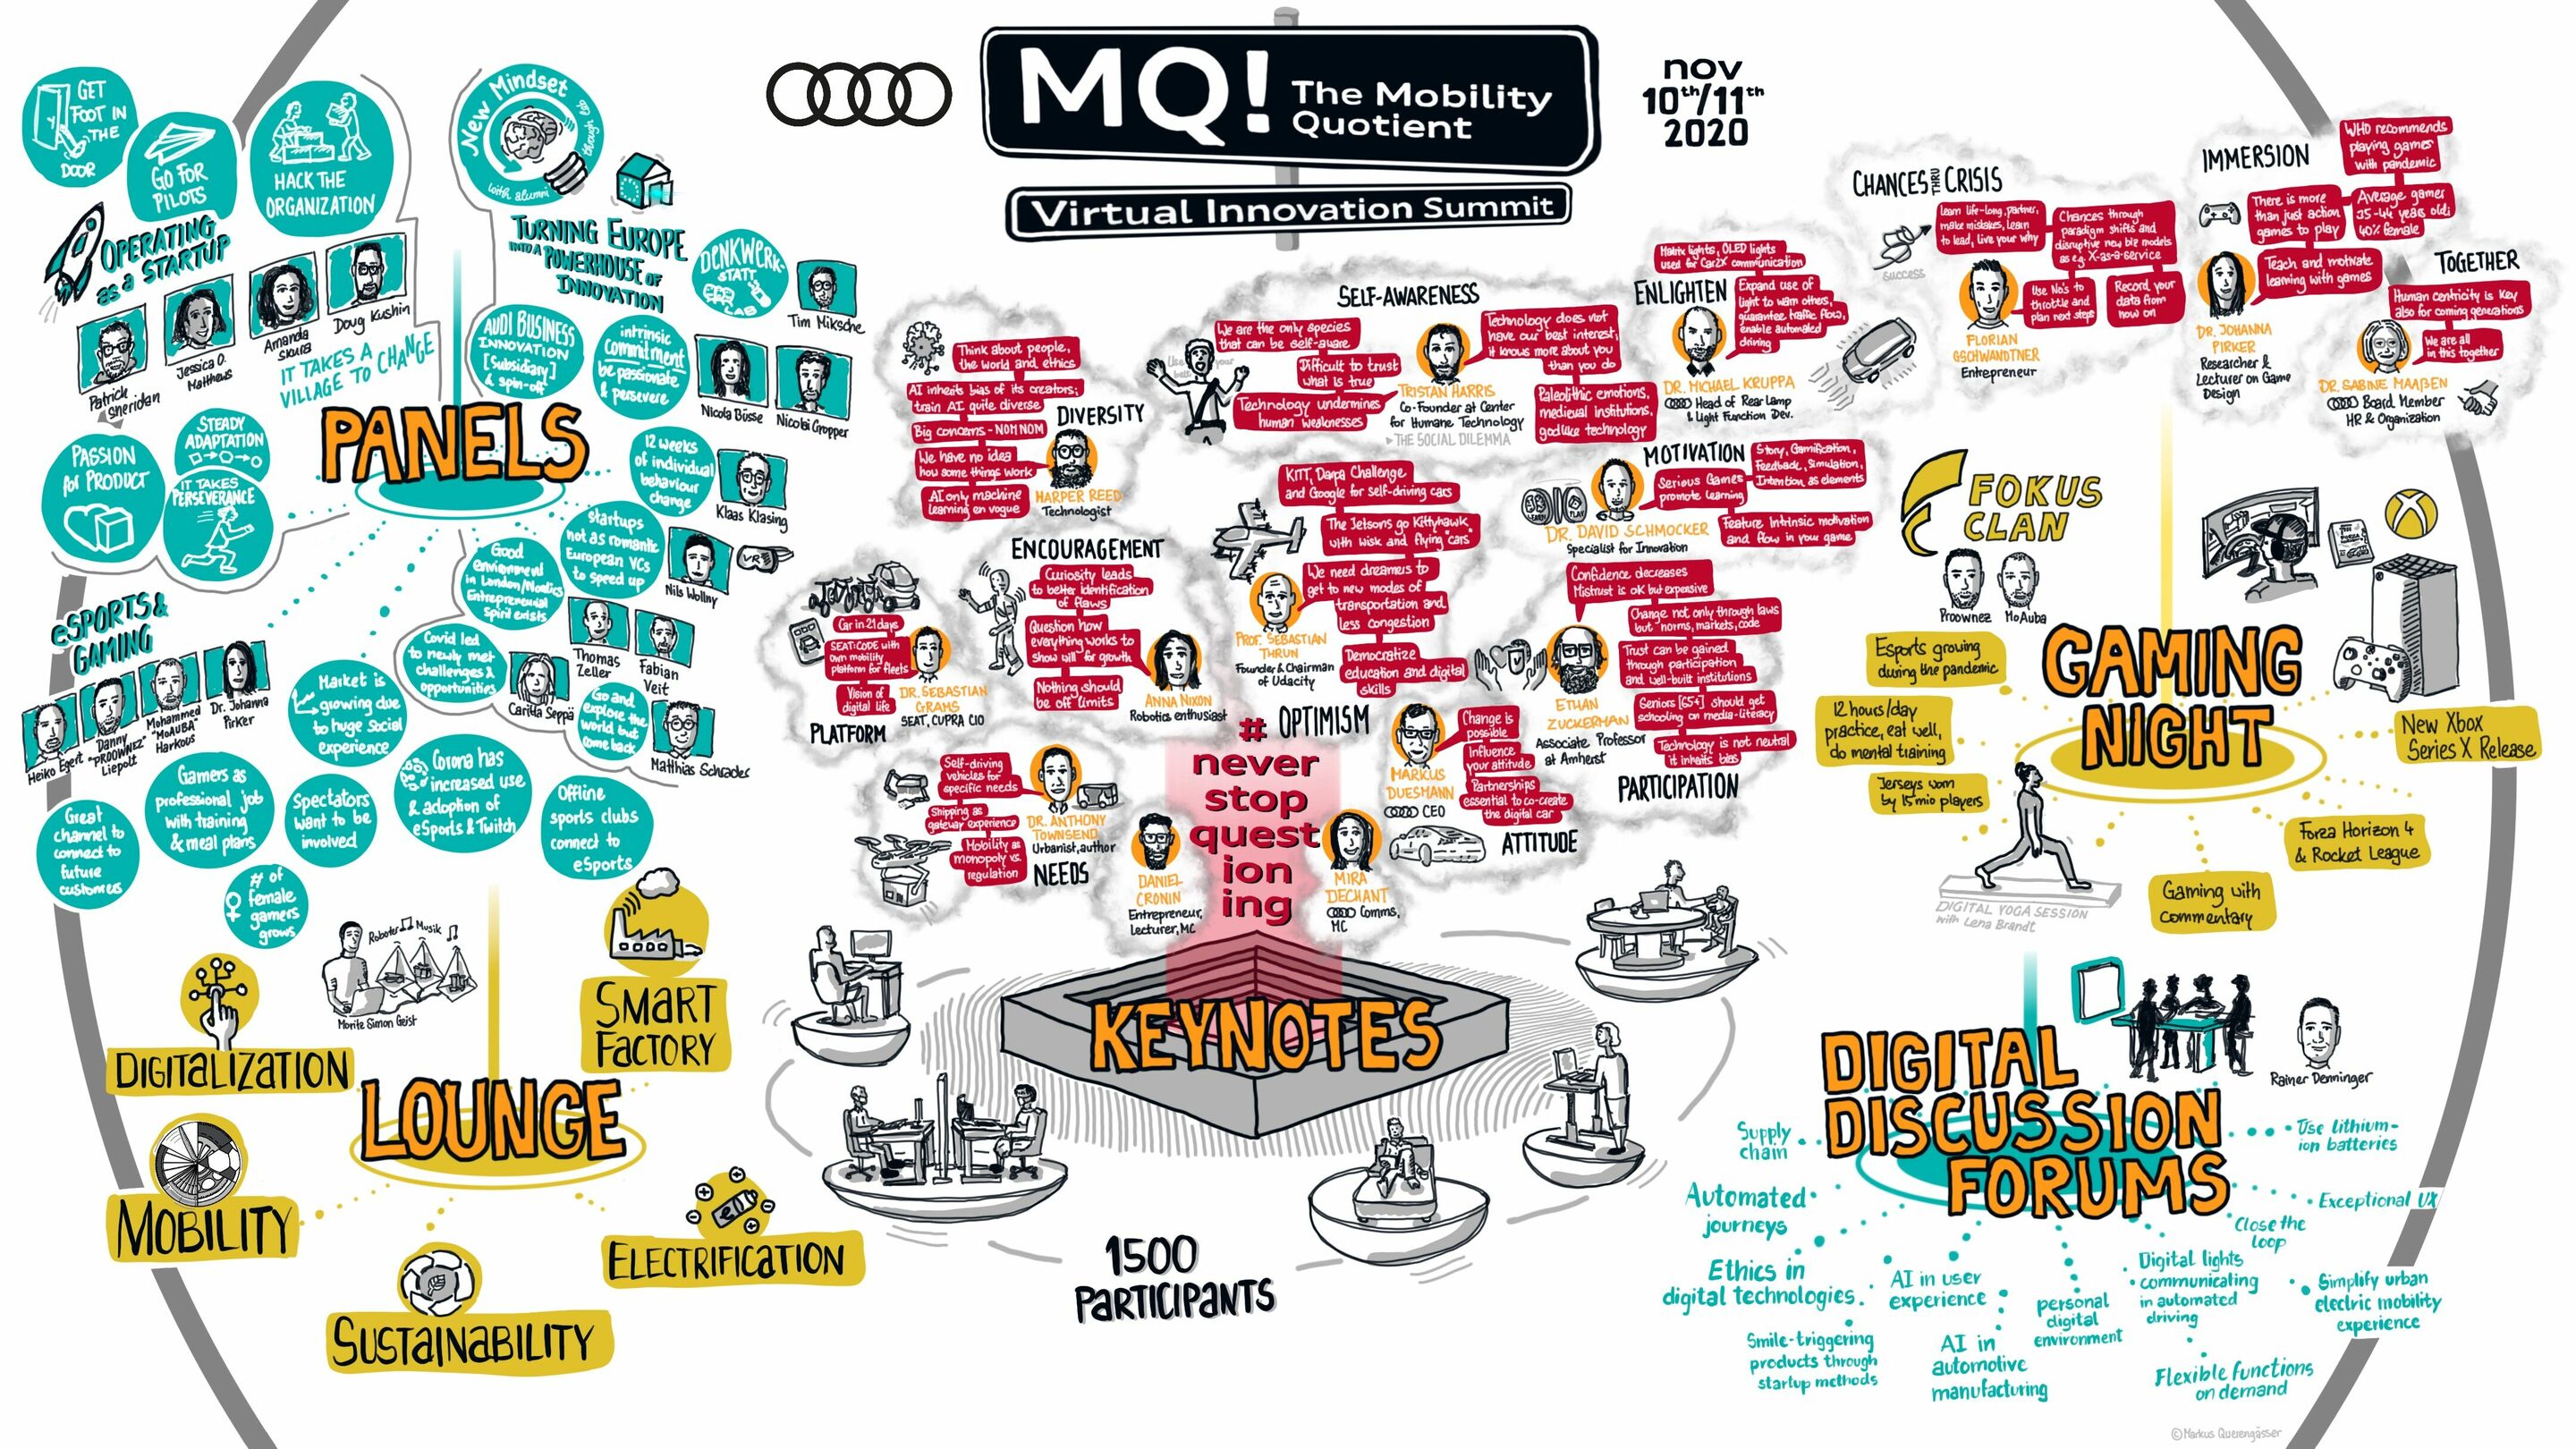 Experts discuss future mobility at the digital MQ! Innovation Summit